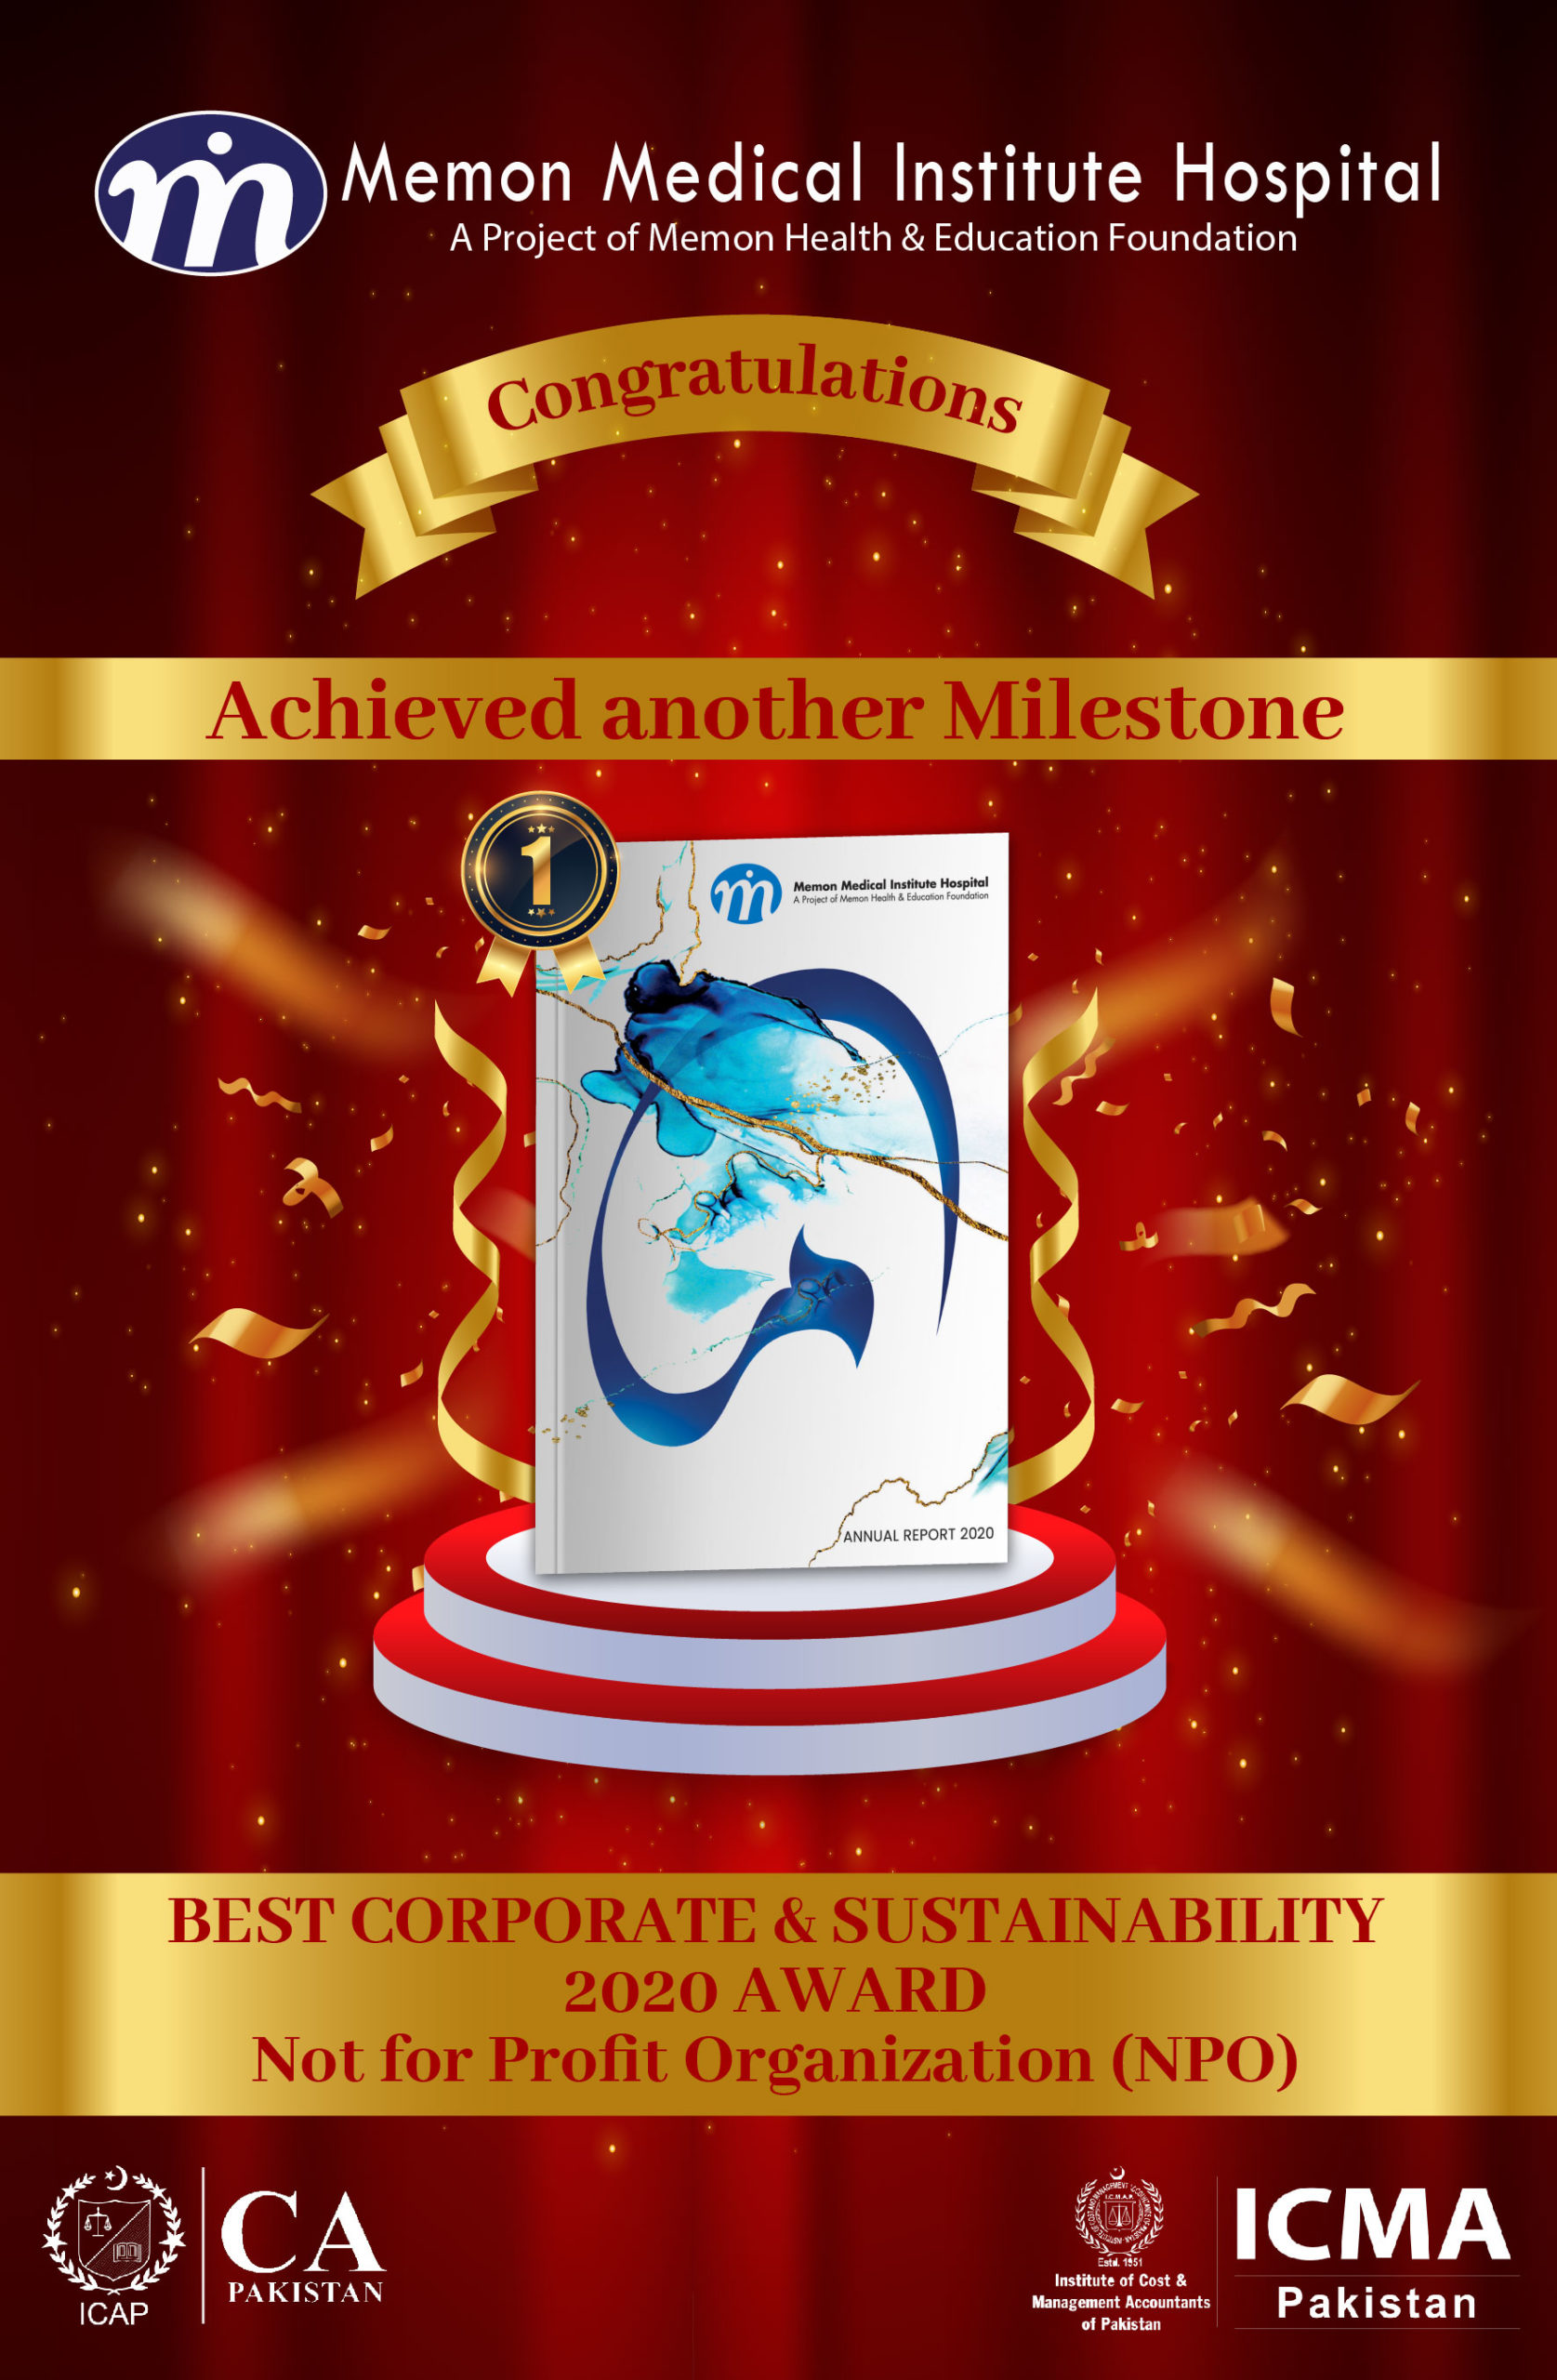 Best Corporate and Sustainability Award 2020